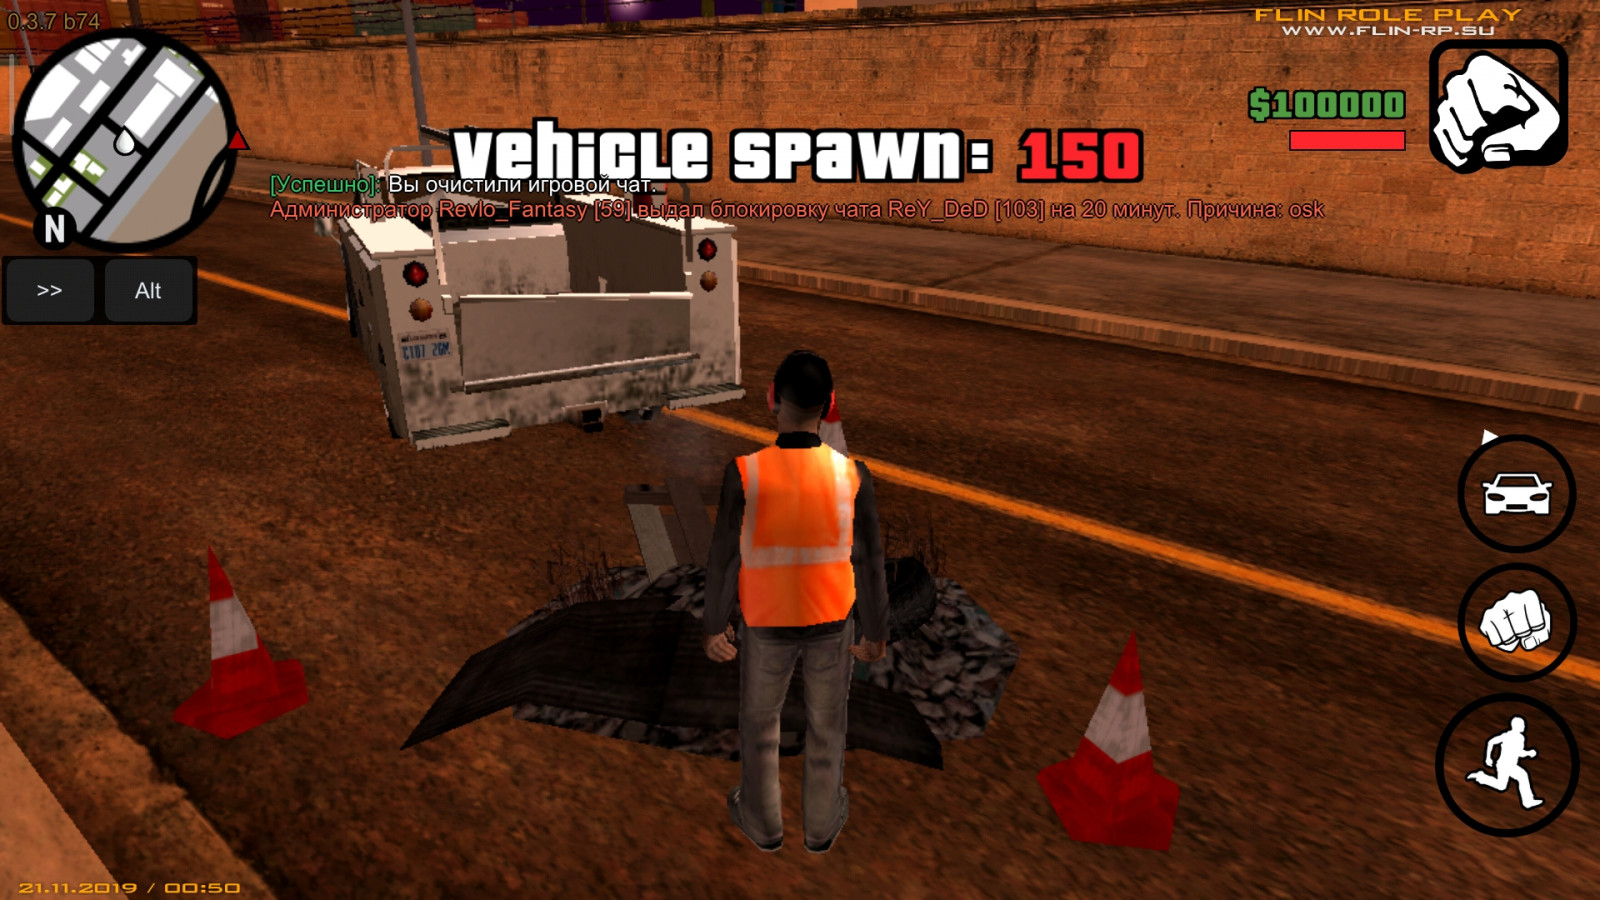 GTA RP APK v1.8 Download for Android 2023